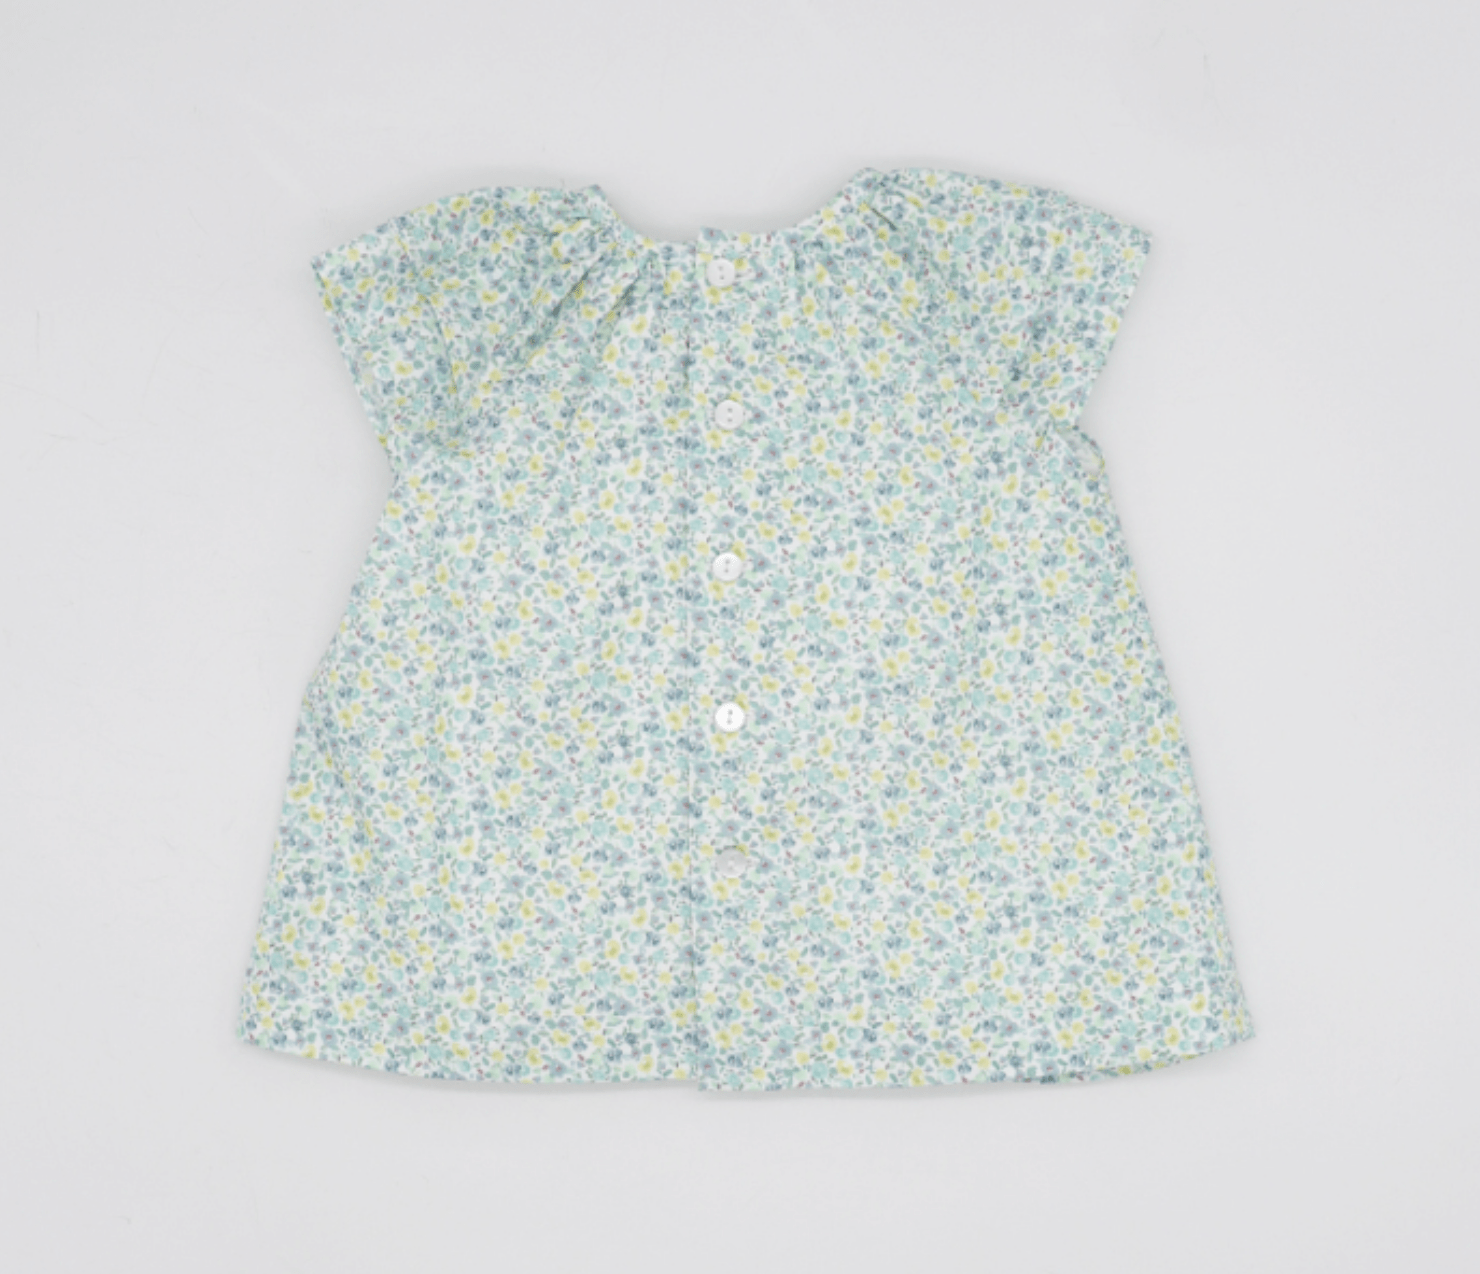 BLUE AND YELLOW FLOWER DRESS SMOCK DOT AND DOUBLE RUFFLED